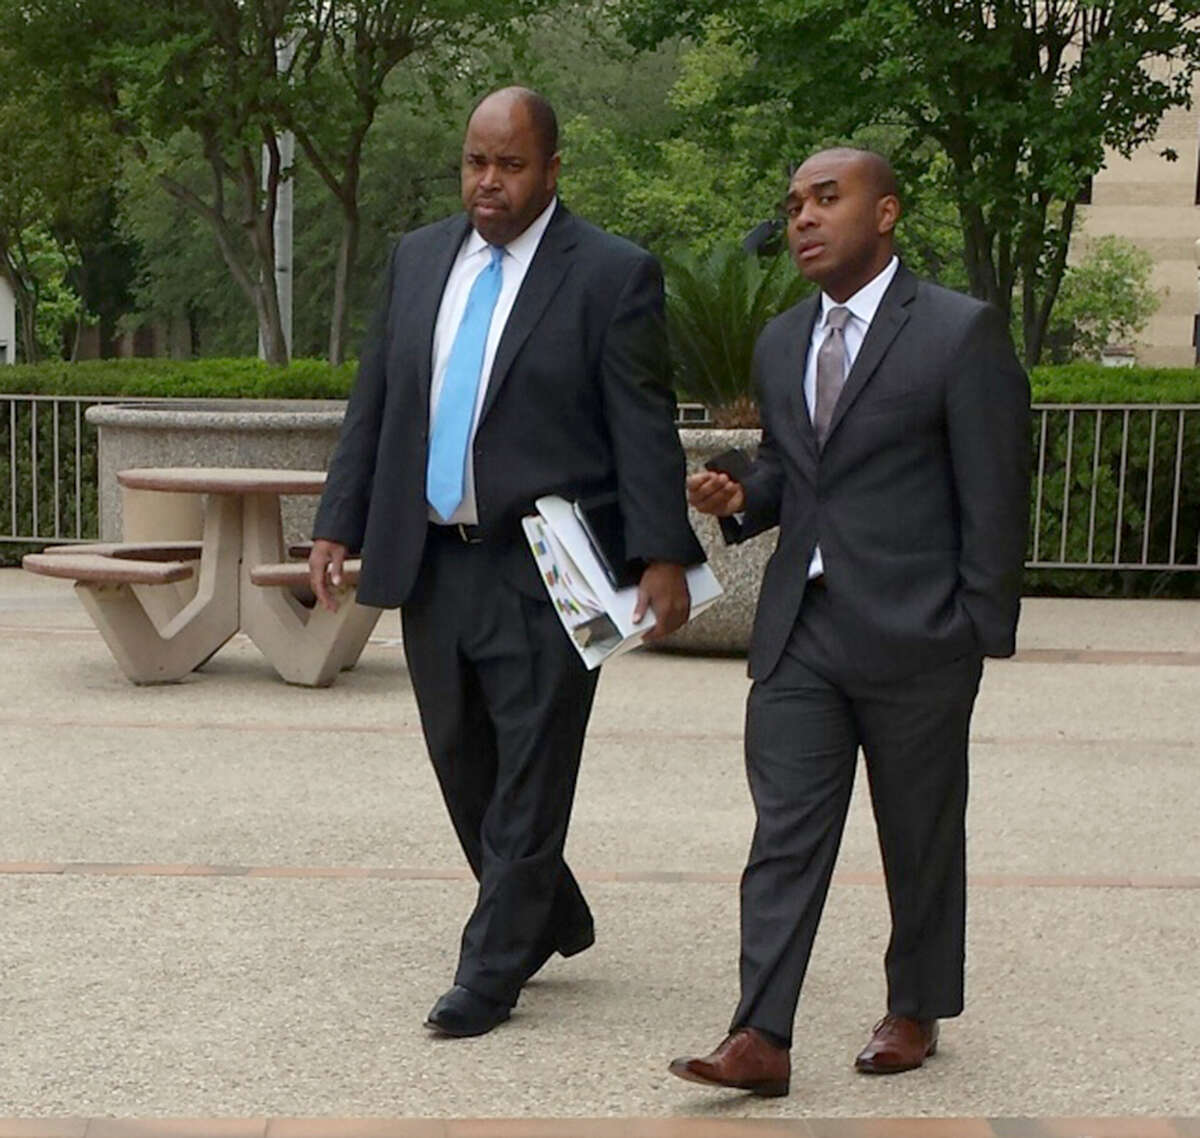 Leonard Roundtree III, right, leaves San Antonio's federal court with his lawyer, Curtis Lilly. Roundtree is on trial on charges that he agreed to help deliver a payment to a hitman his uncle, Alvin Roundtree, allegedly hired to kill his estranged common-law wife. Last June, Alvin Roundtree shot the woman seven times at Joint Base San Antonio -- Fort Sam Houston, but she survived.